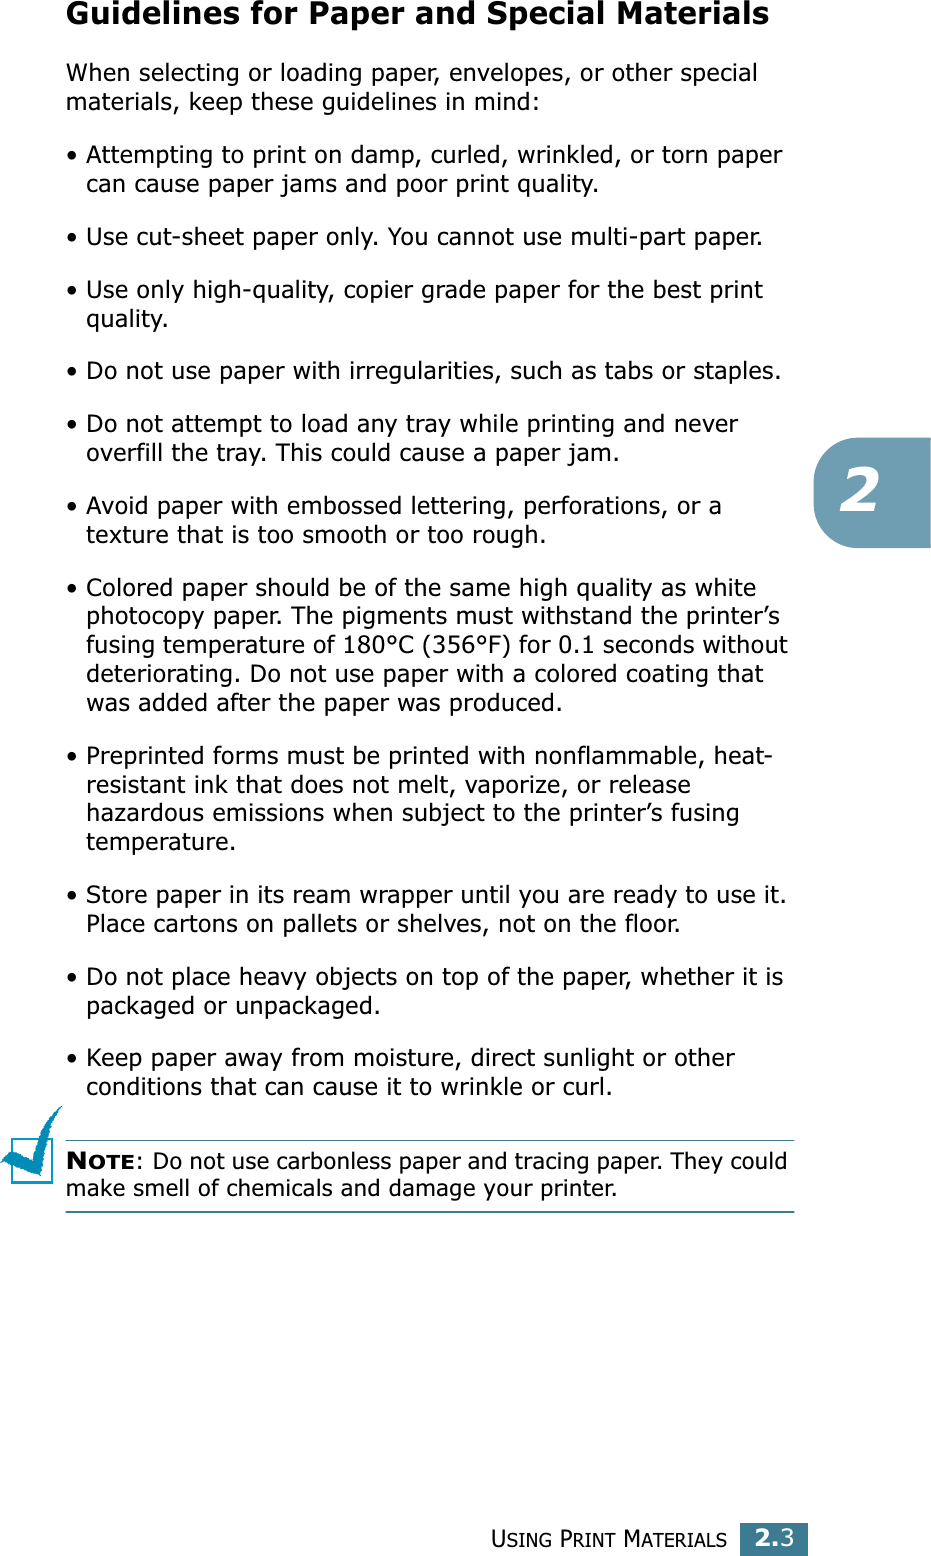 USING PRINT MATERIALS2.32Guidelines for Paper and Special MaterialsWhen selecting or loading paper, envelopes, or other special materials, keep these guidelines in mind:• Attempting to print on damp, curled, wrinkled, or torn paper can cause paper jams and poor print quality.• Use cut-sheet paper only. You cannot use multi-part paper.• Use only high-quality, copier grade paper for the best print quality. • Do not use paper with irregularities, such as tabs or staples.• Do not attempt to load any tray while printing and never overfill the tray. This could cause a paper jam.• Avoid paper with embossed lettering, perforations, or a texture that is too smooth or too rough.• Colored paper should be of the same high quality as white photocopy paper. The pigments must withstand the printer’s fusing temperature of 180°C (356°F) for 0.1 seconds without deteriorating. Do not use paper with a colored coating that was added after the paper was produced.• Preprinted forms must be printed with nonflammable, heat-resistant ink that does not melt, vaporize, or release hazardous emissions when subject to the printer’s fusing temperature.• Store paper in its ream wrapper until you are ready to use it. Place cartons on pallets or shelves, not on the floor. • Do not place heavy objects on top of the paper, whether it is packaged or unpackaged. • Keep paper away from moisture, direct sunlight or other conditions that can cause it to wrinkle or curl.NOTE: Do not use carbonless paper and tracing paper. They could make smell of chemicals and damage your printer.